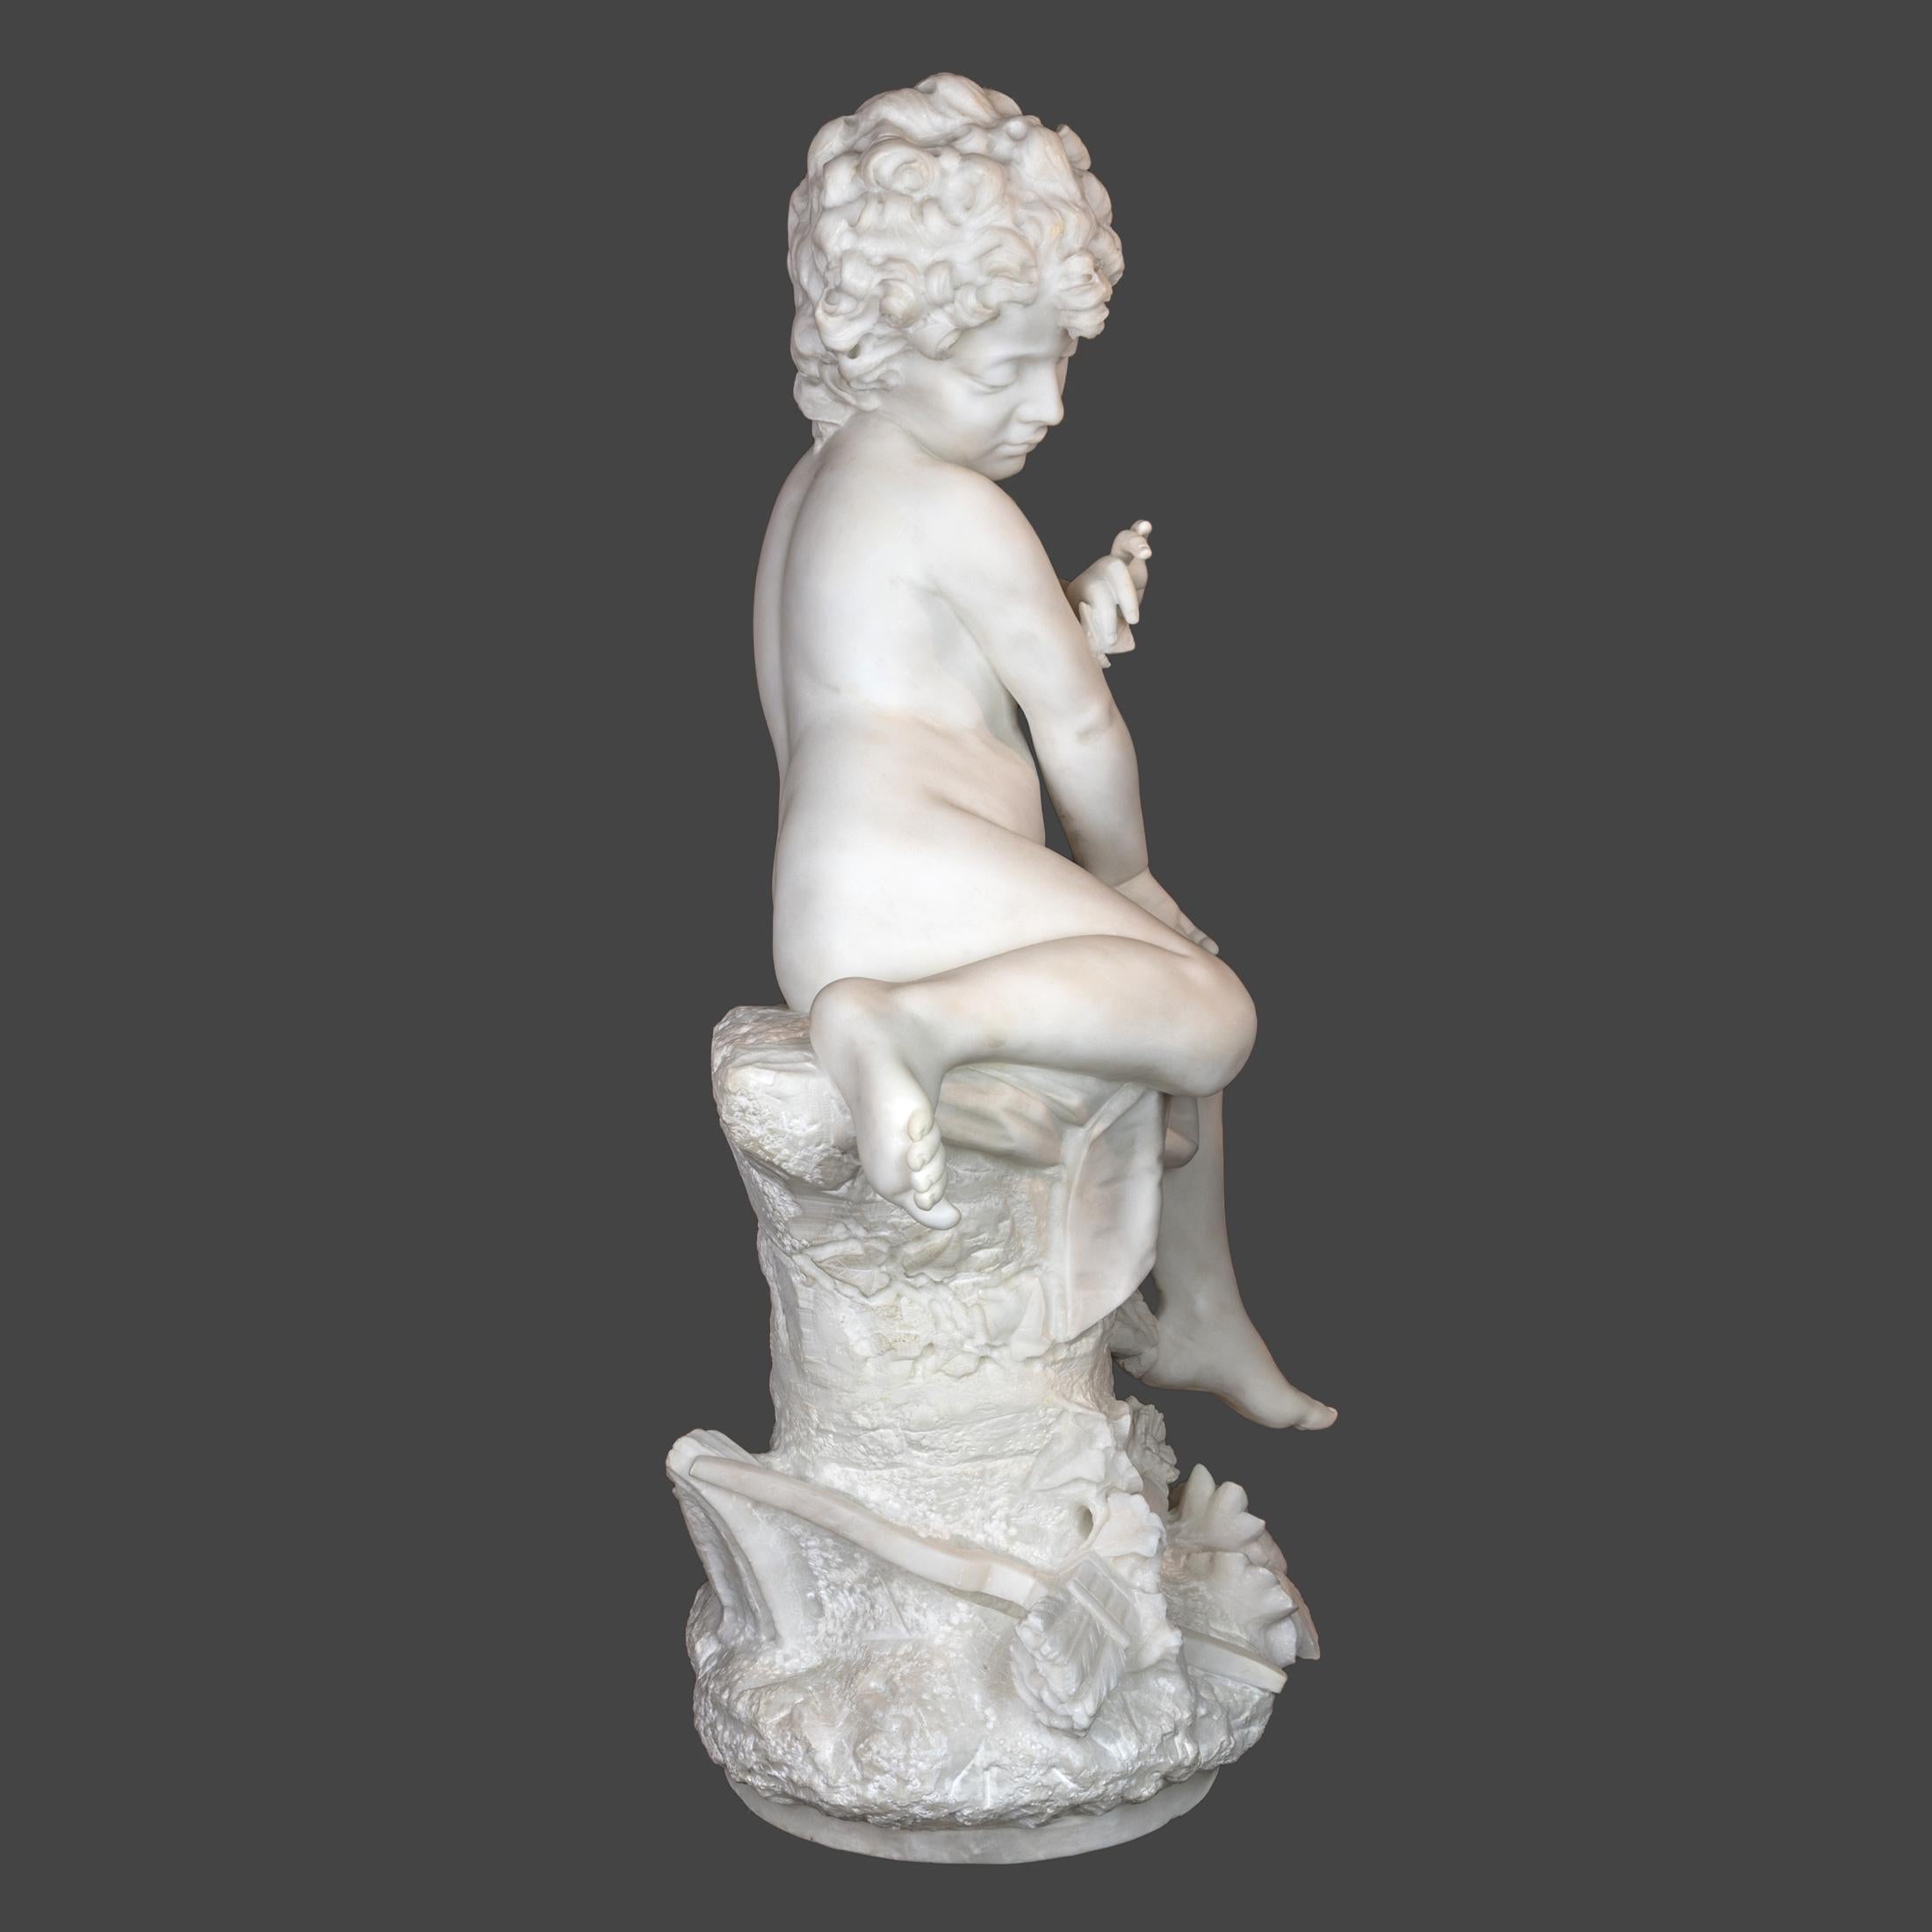 A fine quality alabaster sculpture of cupid with a butterfly. 
Nude figure of cupid with a butterfly, sitting on a rock, his bow and arrow on the ground with the flowers. 

Artist: After William Adolphe Bouguereau (1825–1905)
Origin: